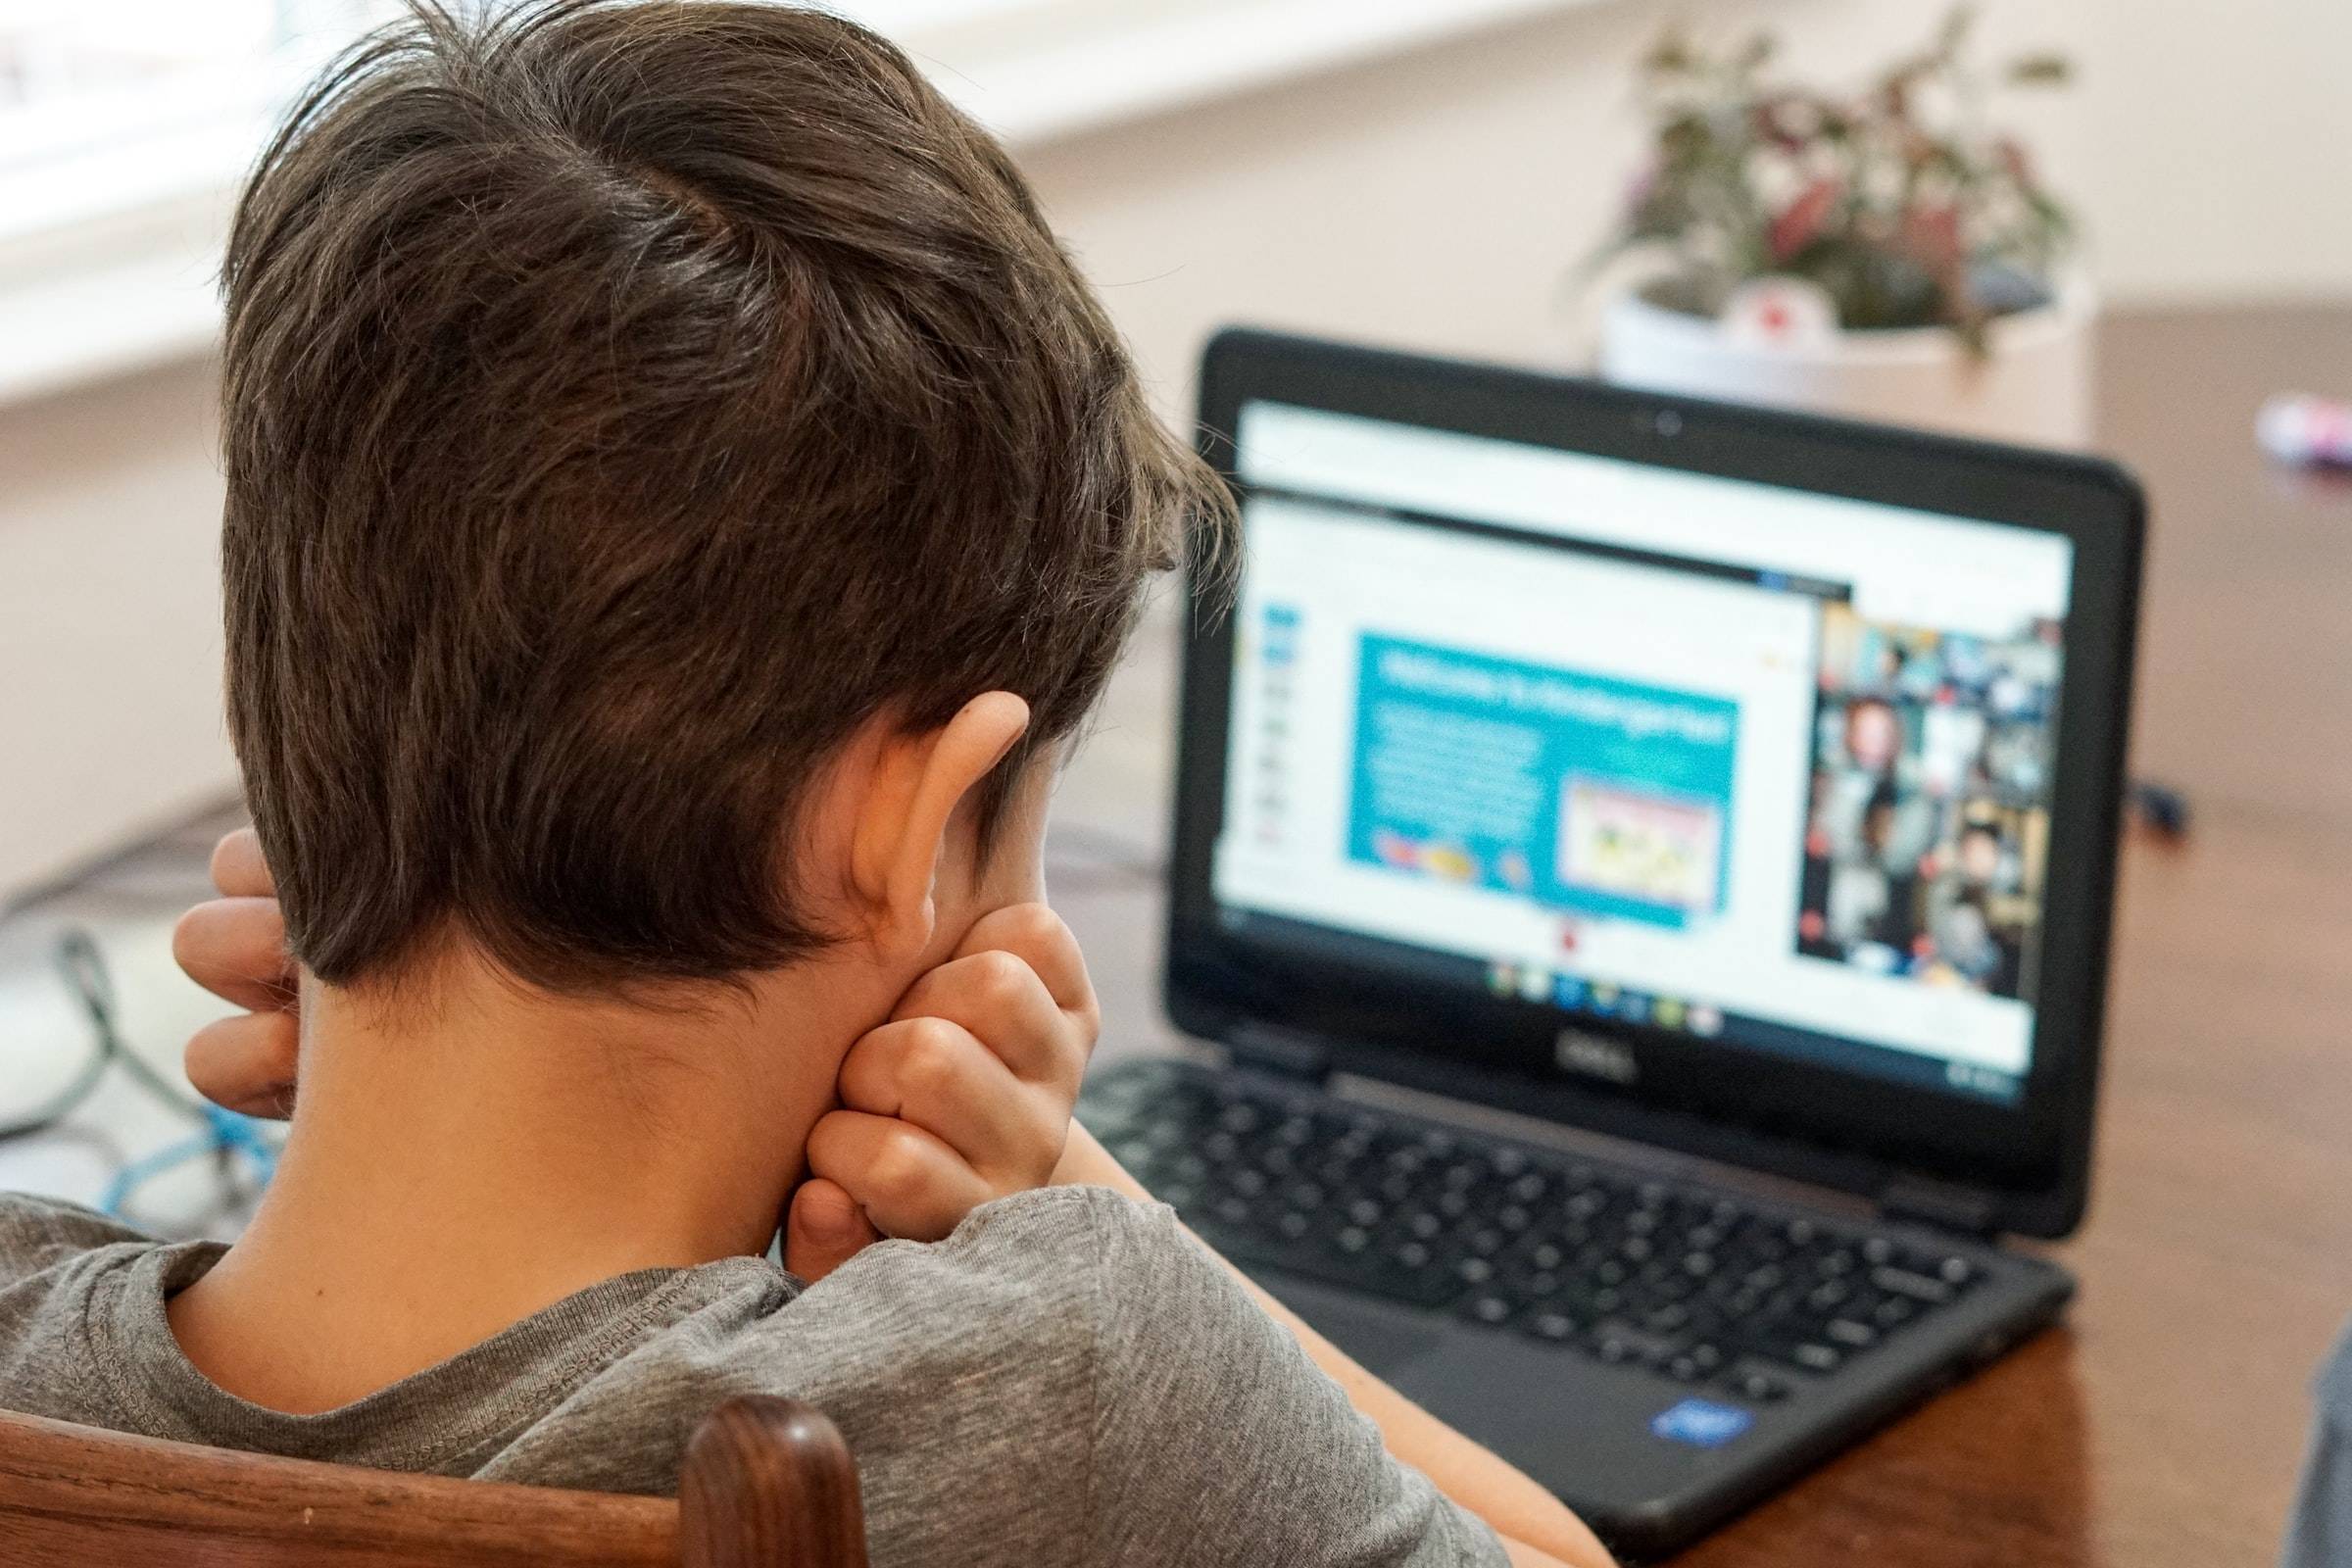 Child online learning